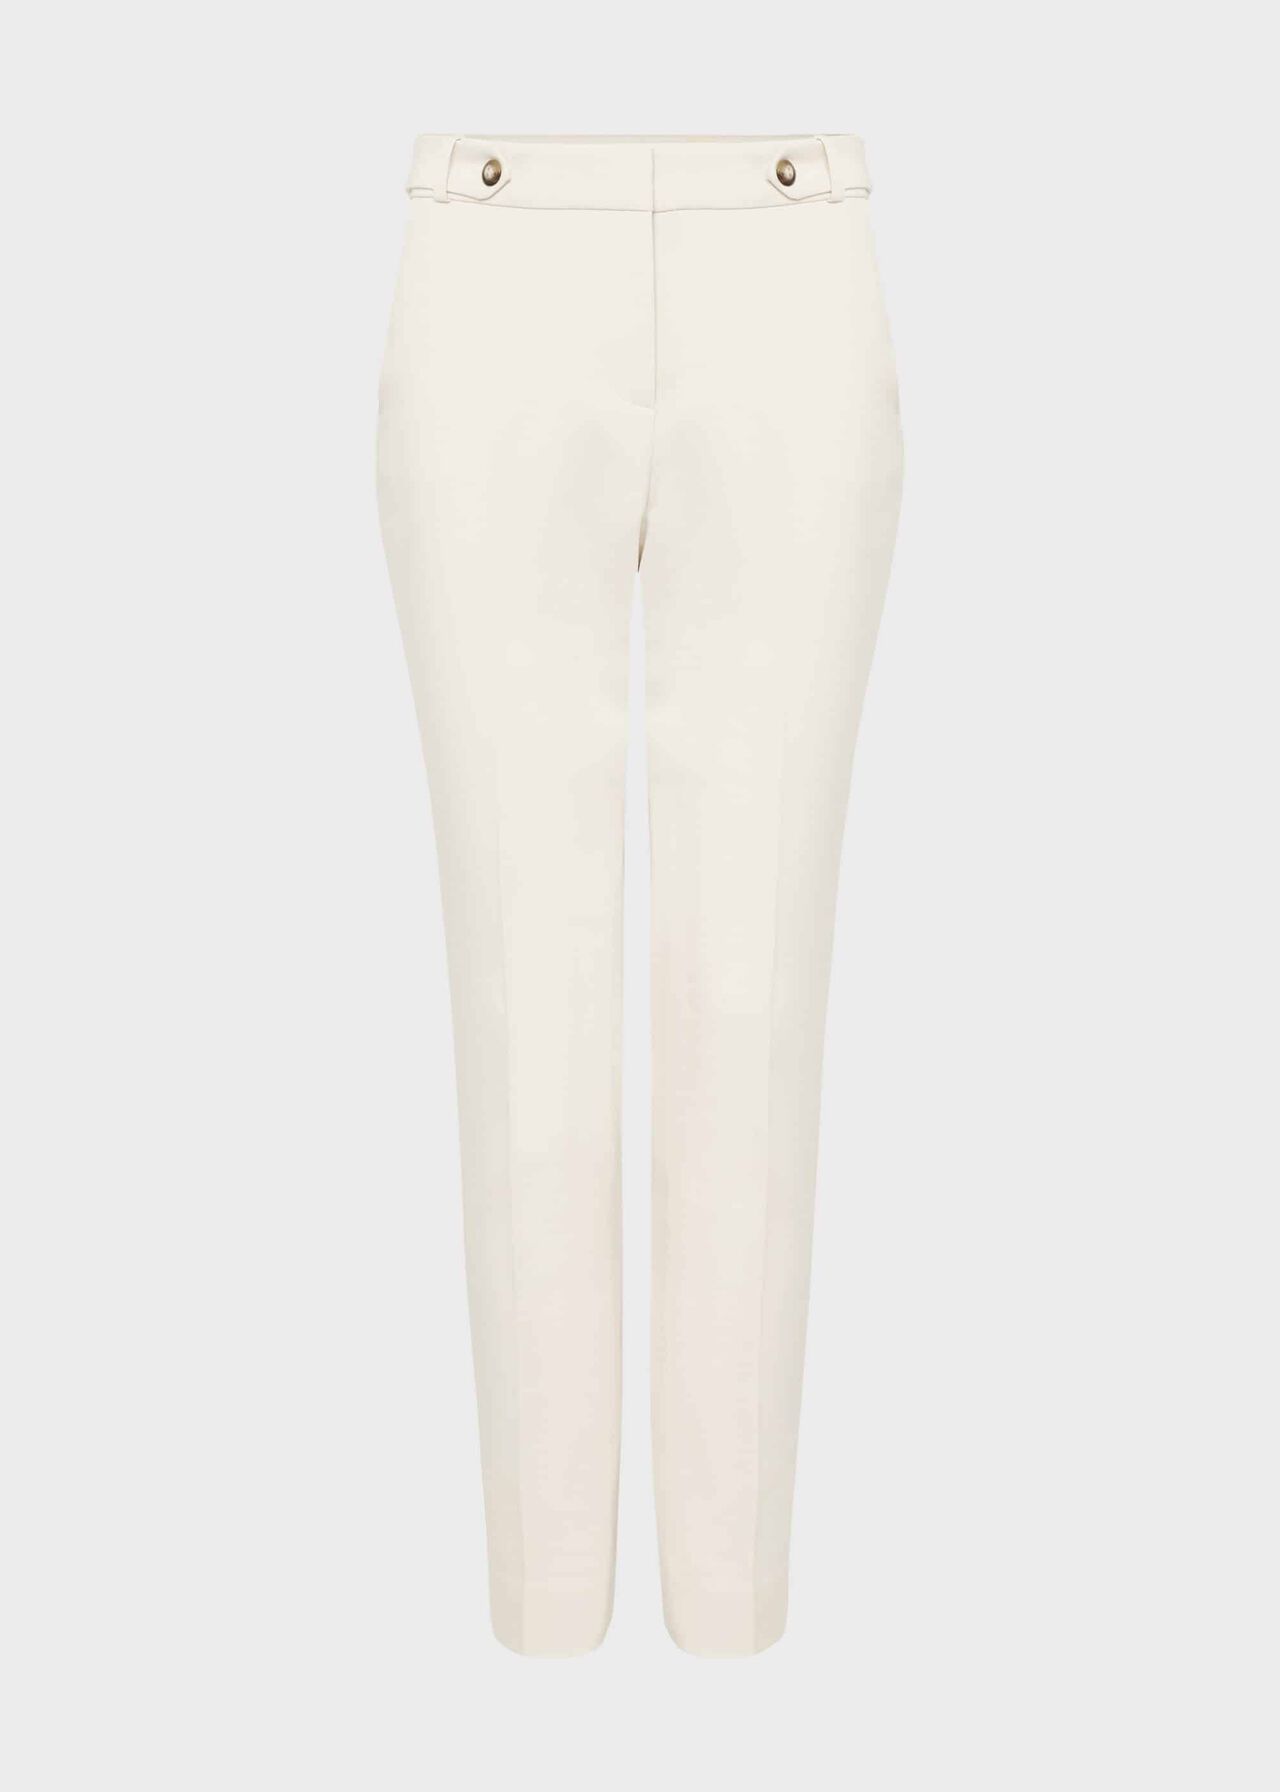 Jasmine Cotton Blend Tapered Trousers, Warm Ivory, hi-res